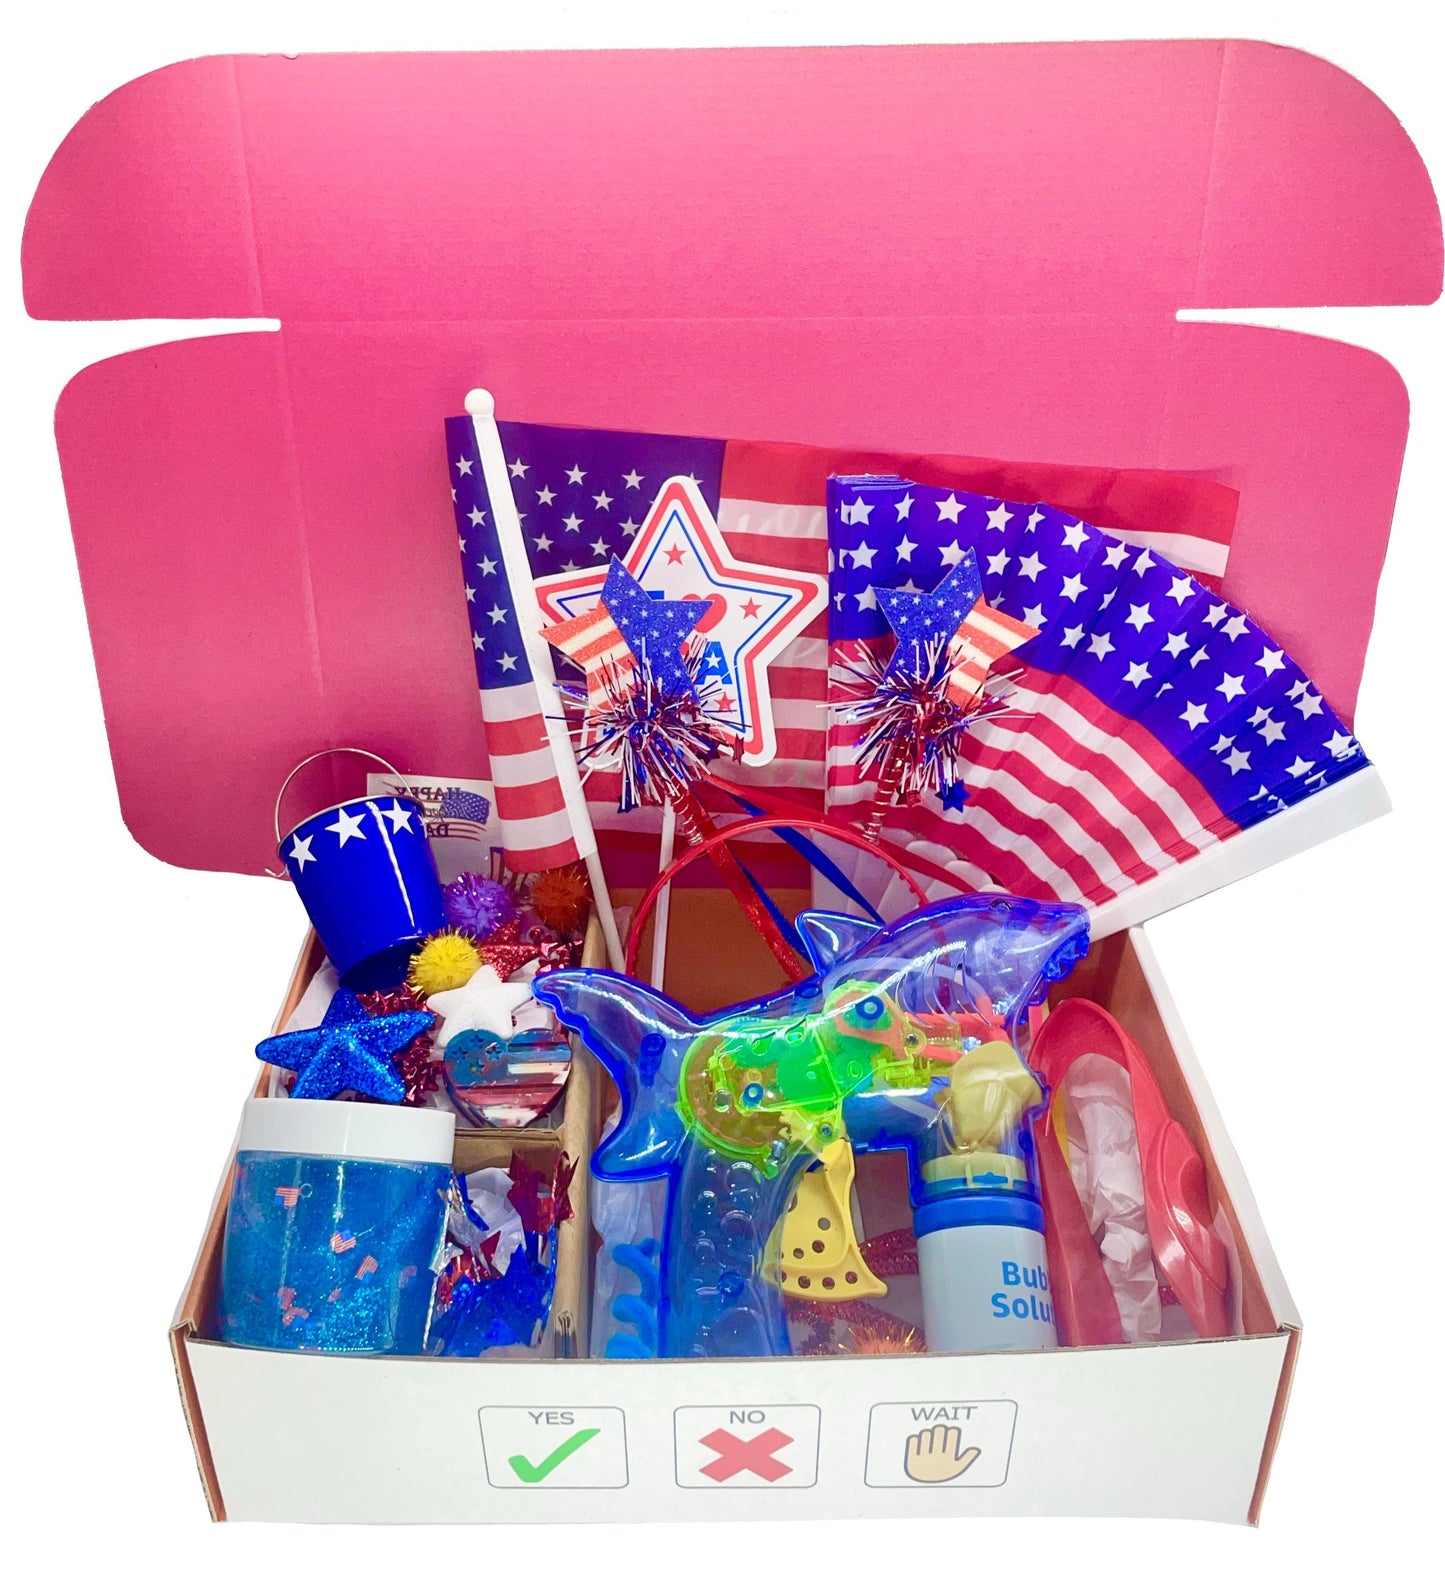 Fourth of July sensory box for kids and autistics. Comes with patriotic slime, decorations, bubbles, tweezers for fine motor skills, flag, headband, necklace, decorations, and a fan.